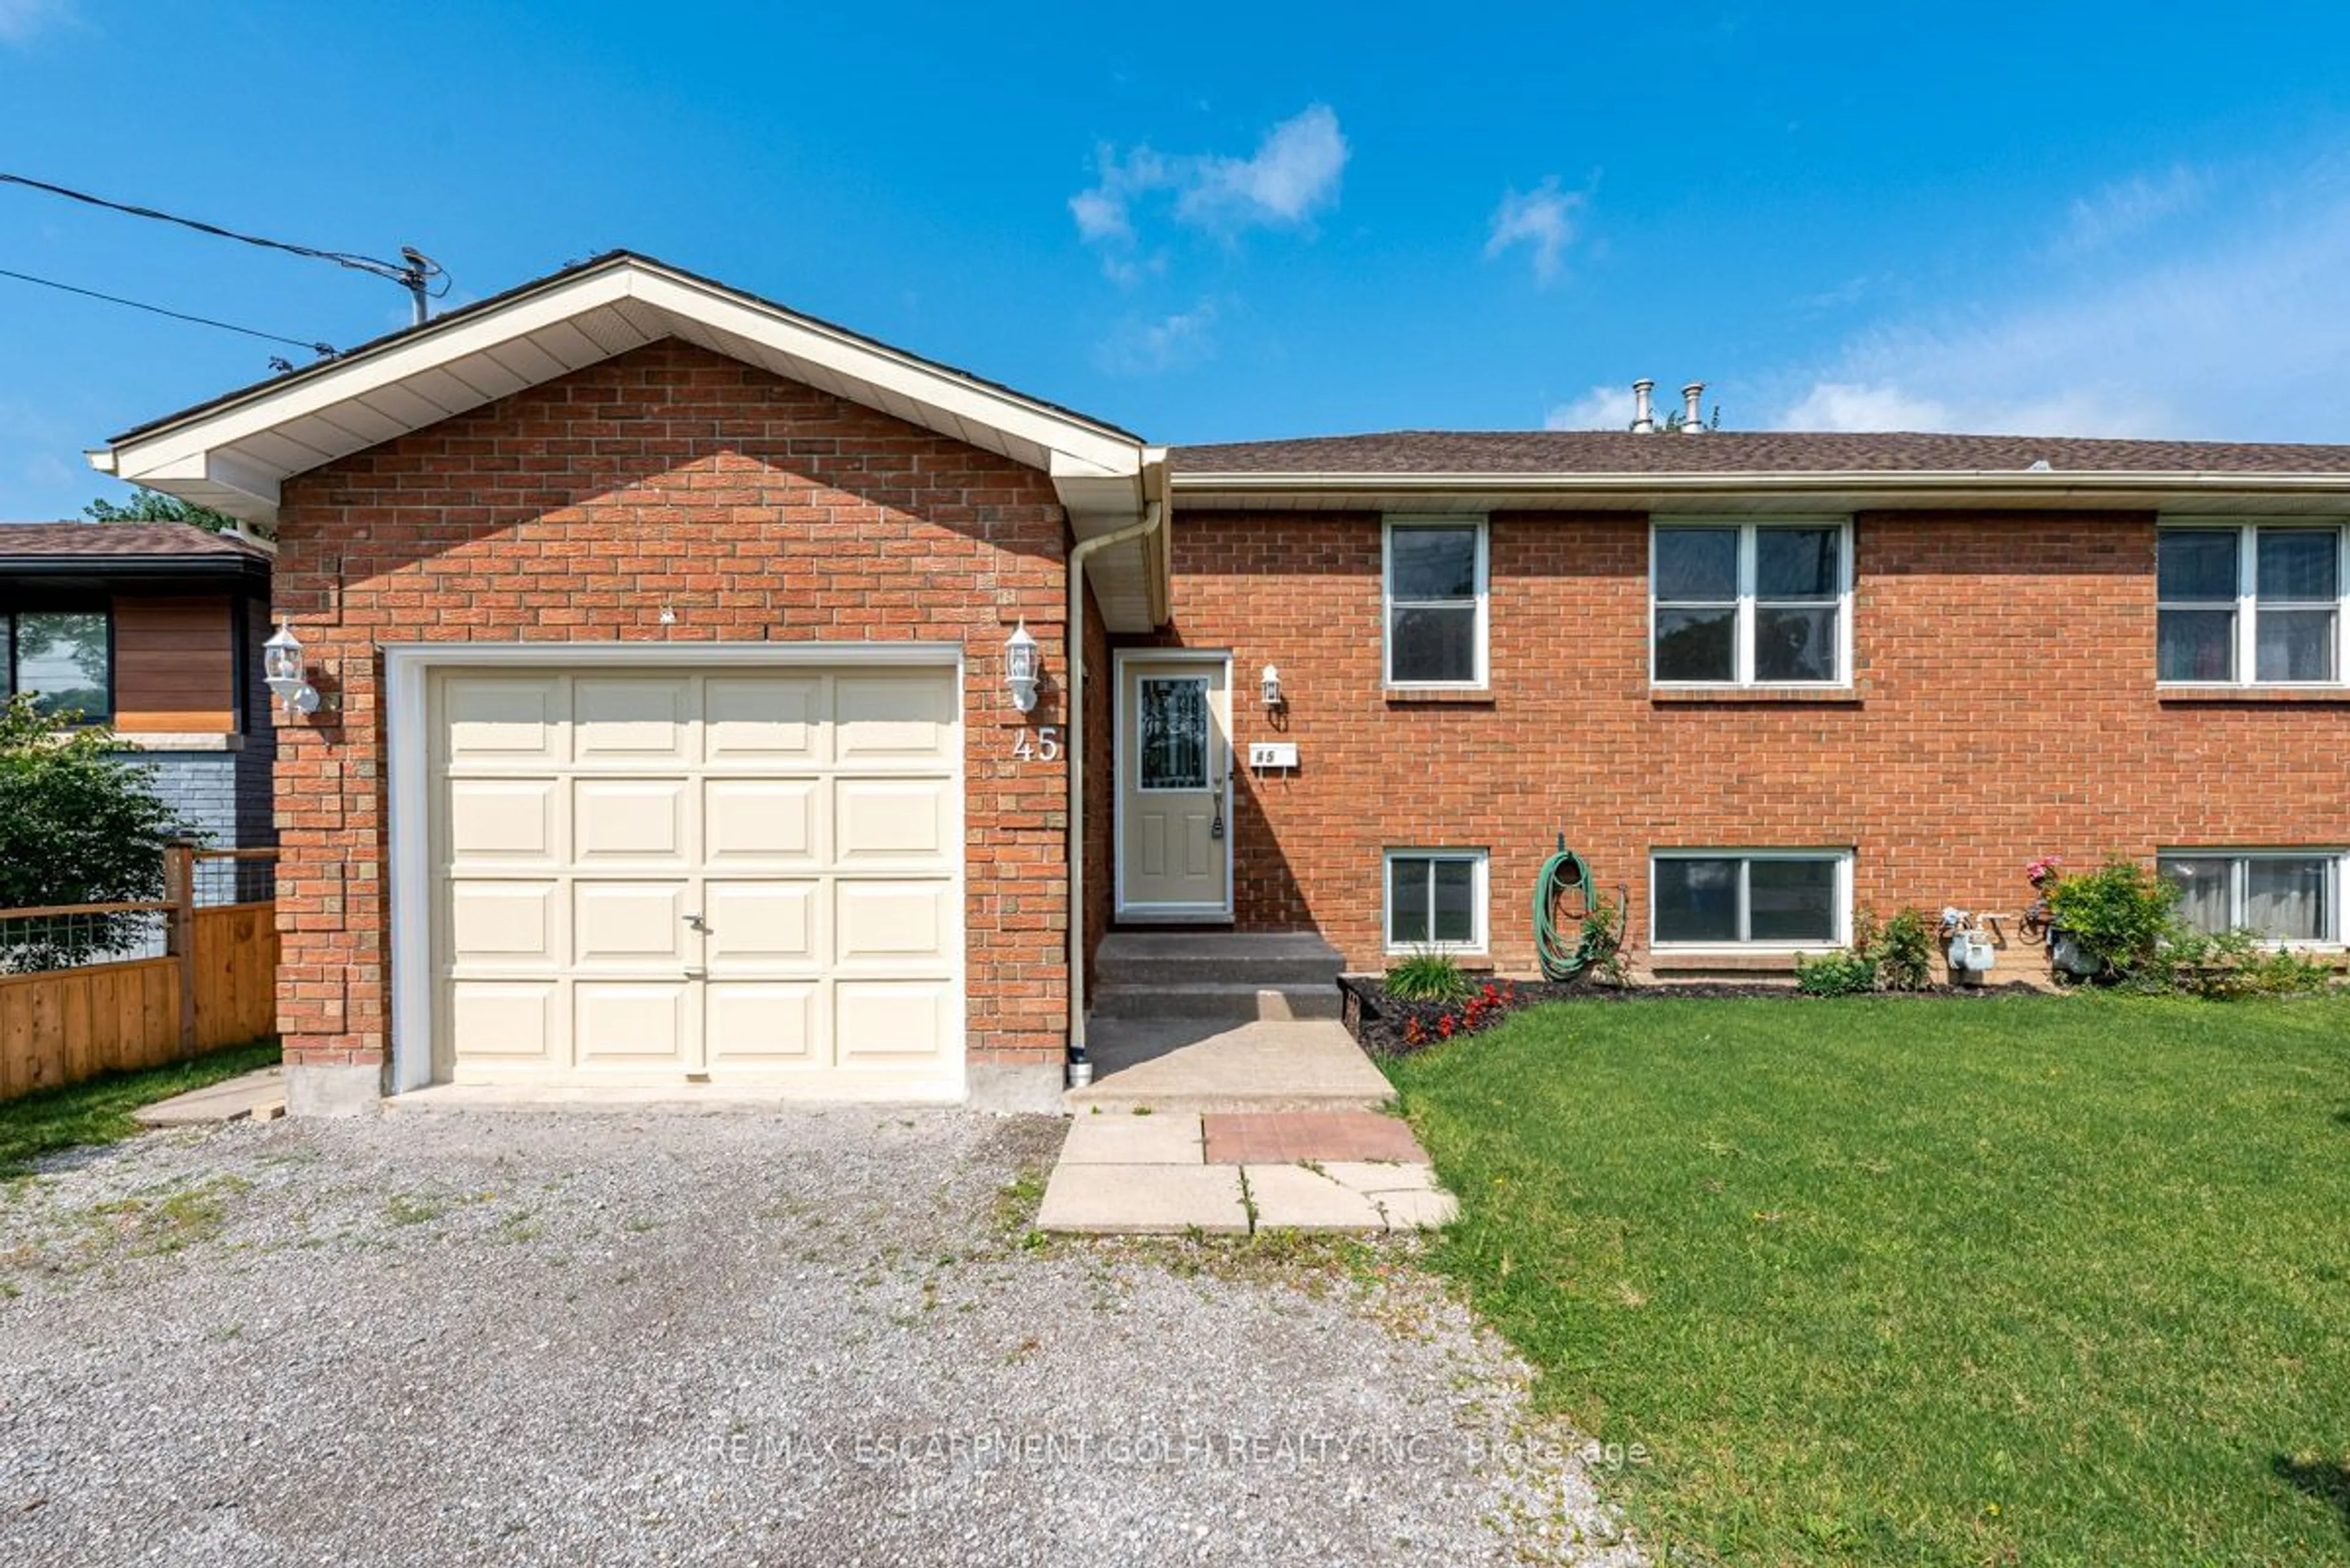 Home with brick exterior material for 45 Louth St, St. Catharines Ontario L2S 2T6